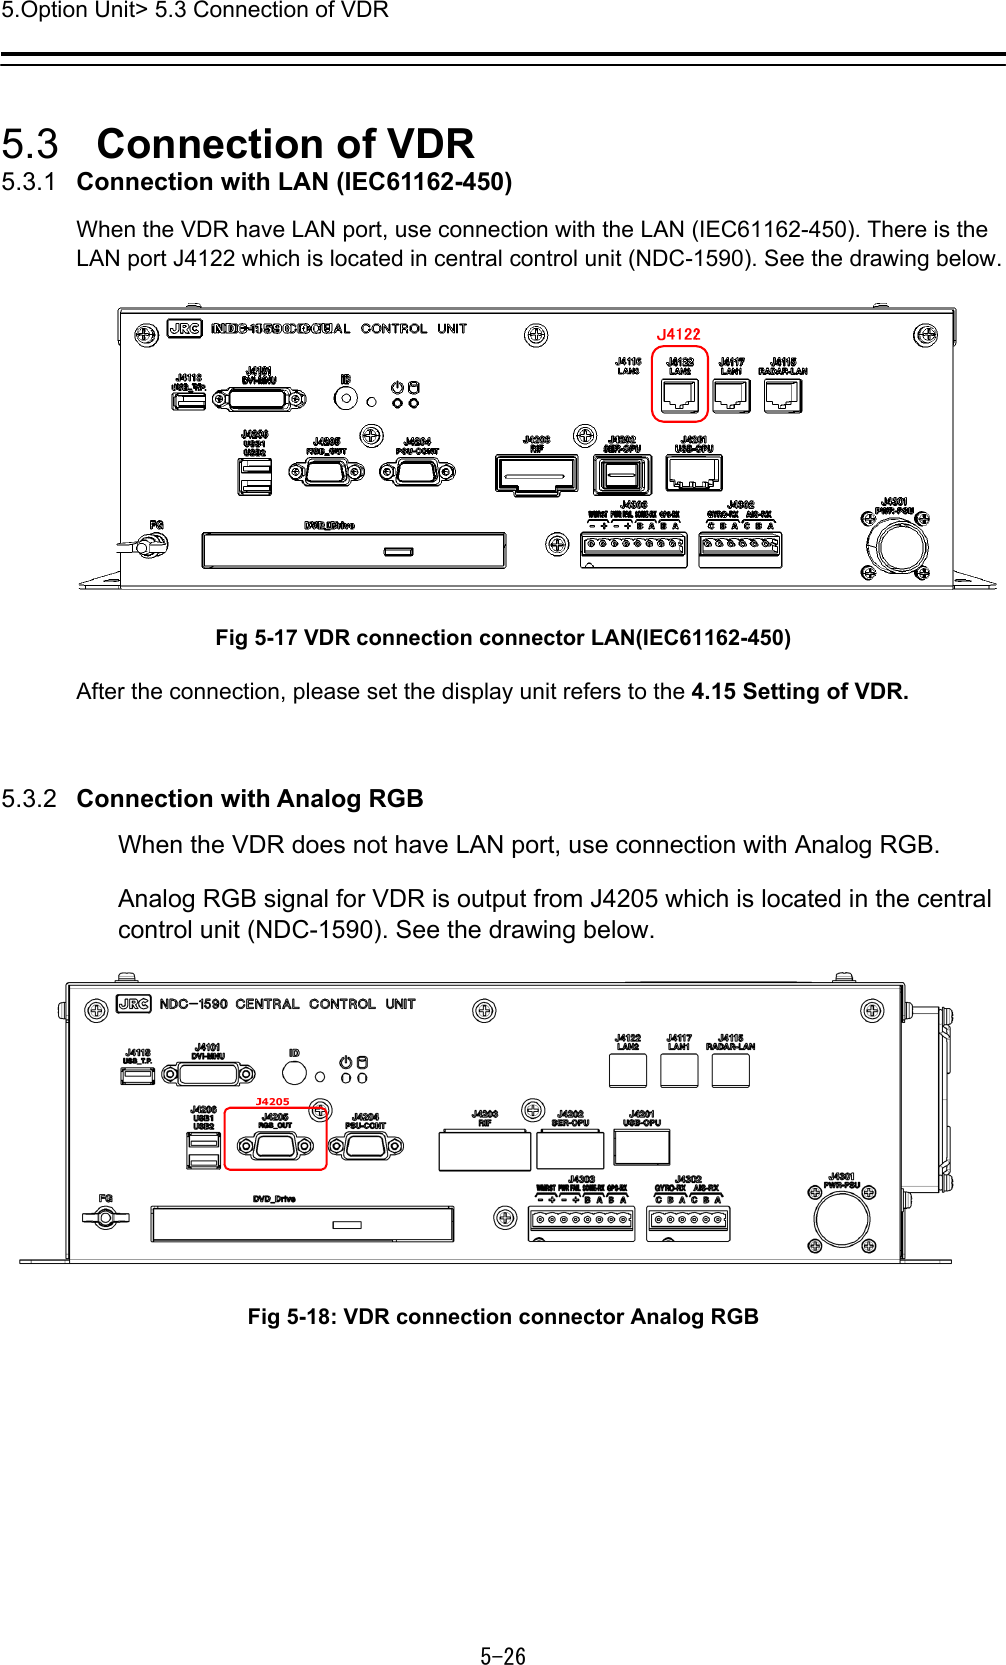 5.Option Unit&gt; 5.3 Connection of VDR 5-26  5.3   Connection of VDR 5.3.1   Connection with LAN (IEC61162-450) When the VDR have LAN port, use connection with the LAN (IEC61162-450). There is the LAN port J4122 which is located in central control unit (NDC-1590). See the drawing below.  Fig 5-17 VDR connection connector LAN(IEC61162-450) After the connection, please set the display unit refers to the 4.15 Setting of VDR.  5.3.2   Connection with Analog RGB When the VDR does not have LAN port, use connection with Analog RGB. Analog RGB signal for VDR is output from J4205 which is located in the central control unit (NDC-1590). See the drawing below.    Fig 5-18: VDR connection connector Analog RGB 